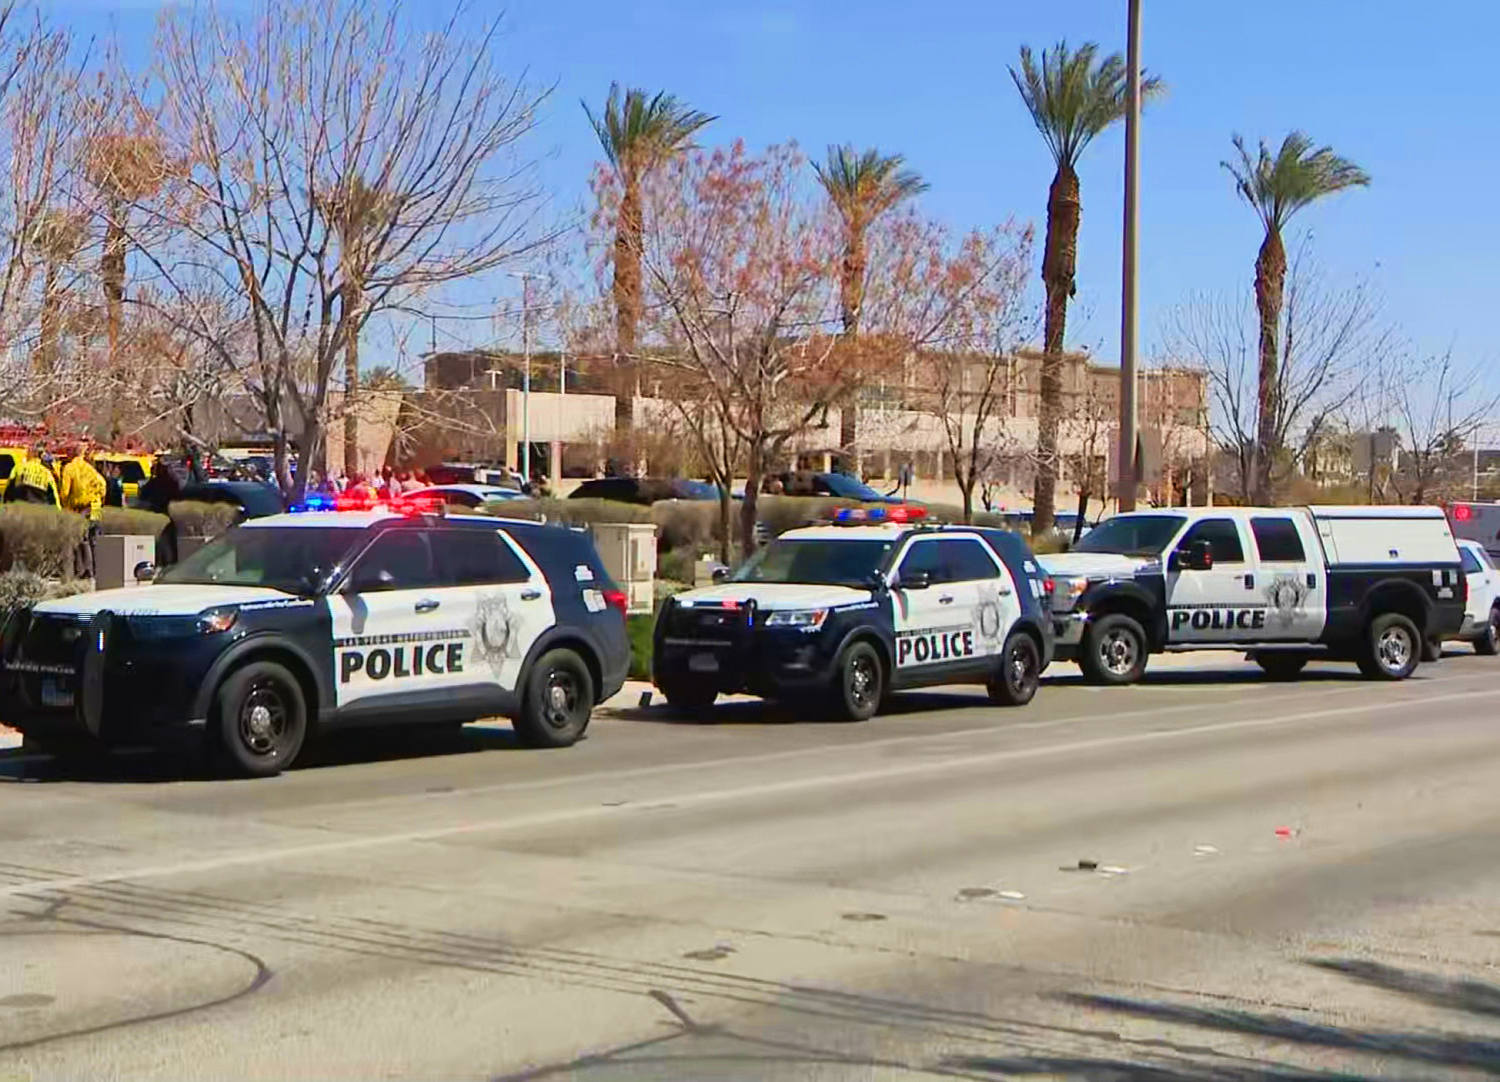 Shooting at Las Vegas law office leaves 3, including the gunman, dead, police say